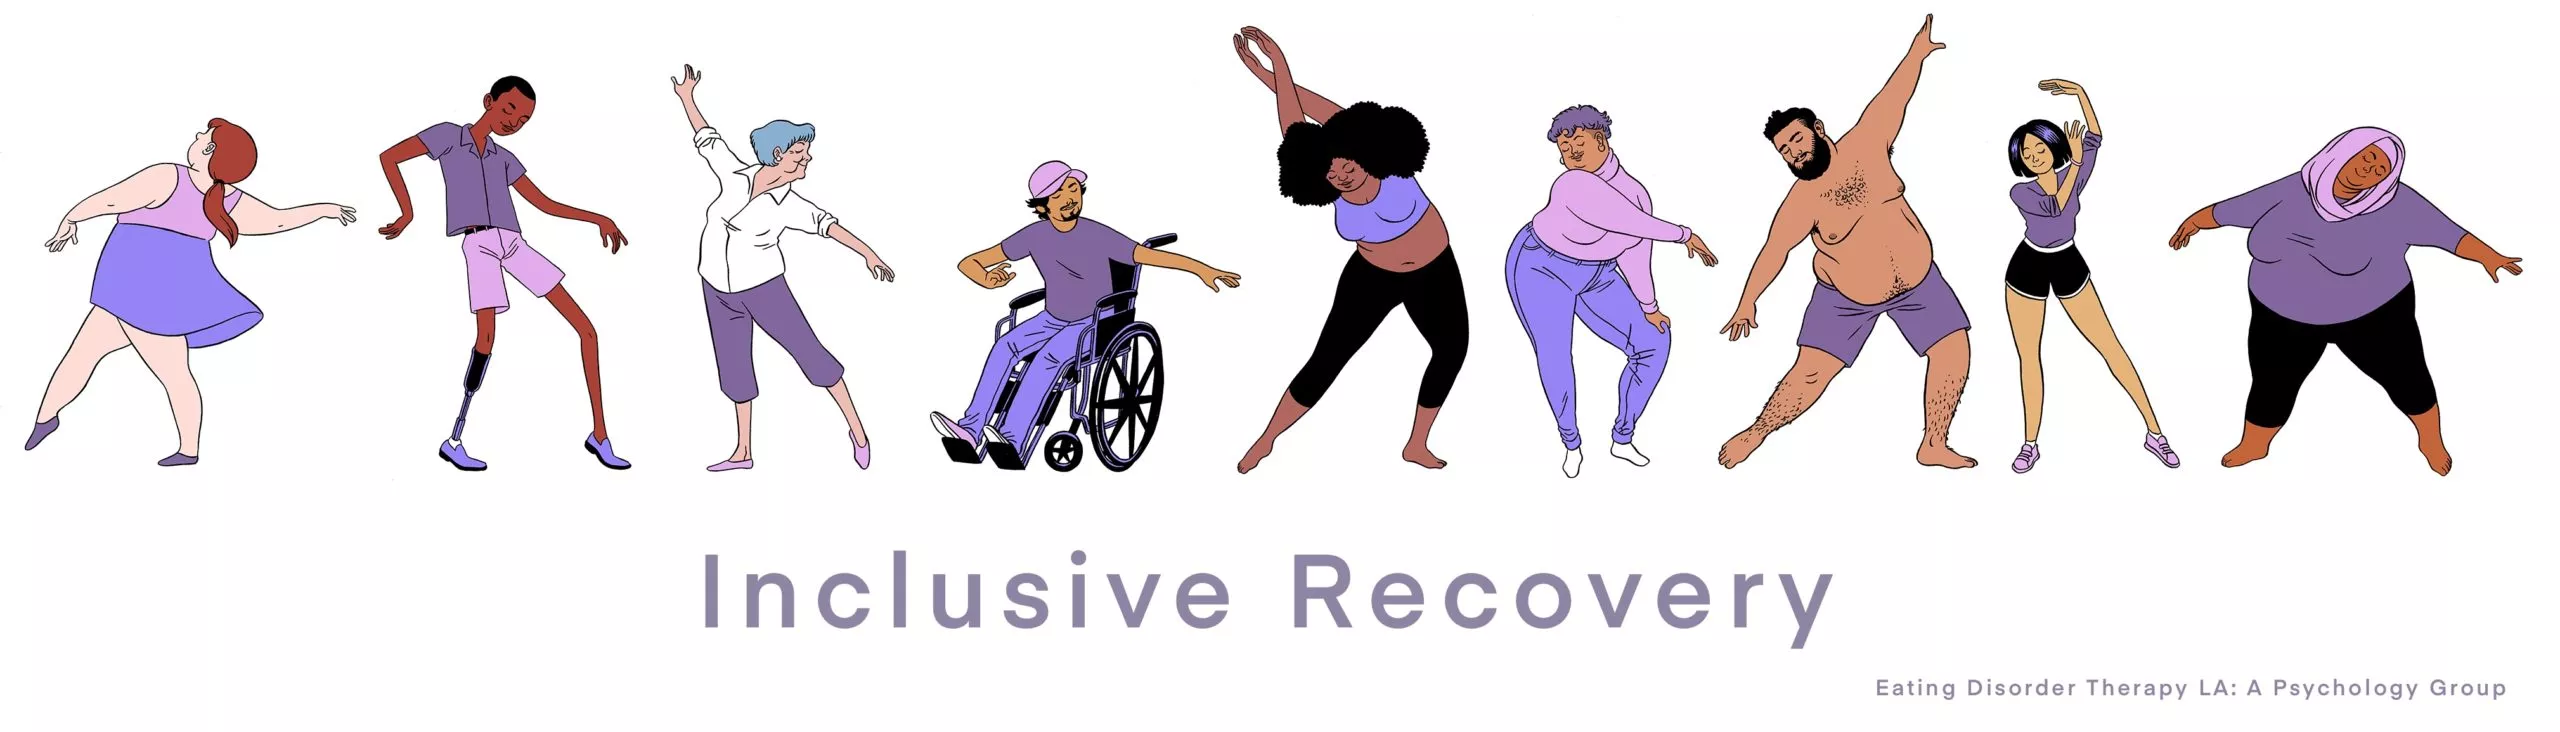 Illustrated image of multiple dancers of various body shapes, sizes and abilities with the text "Inclusive Recovery" underneath. Demonstrating Body Diversity. Eating Disorder Treatment in Los Angeles, CA and online eating disorder treatment throughout the state of California including Modesto, Bakersfield, Napa, Palm Springs, and beyond!